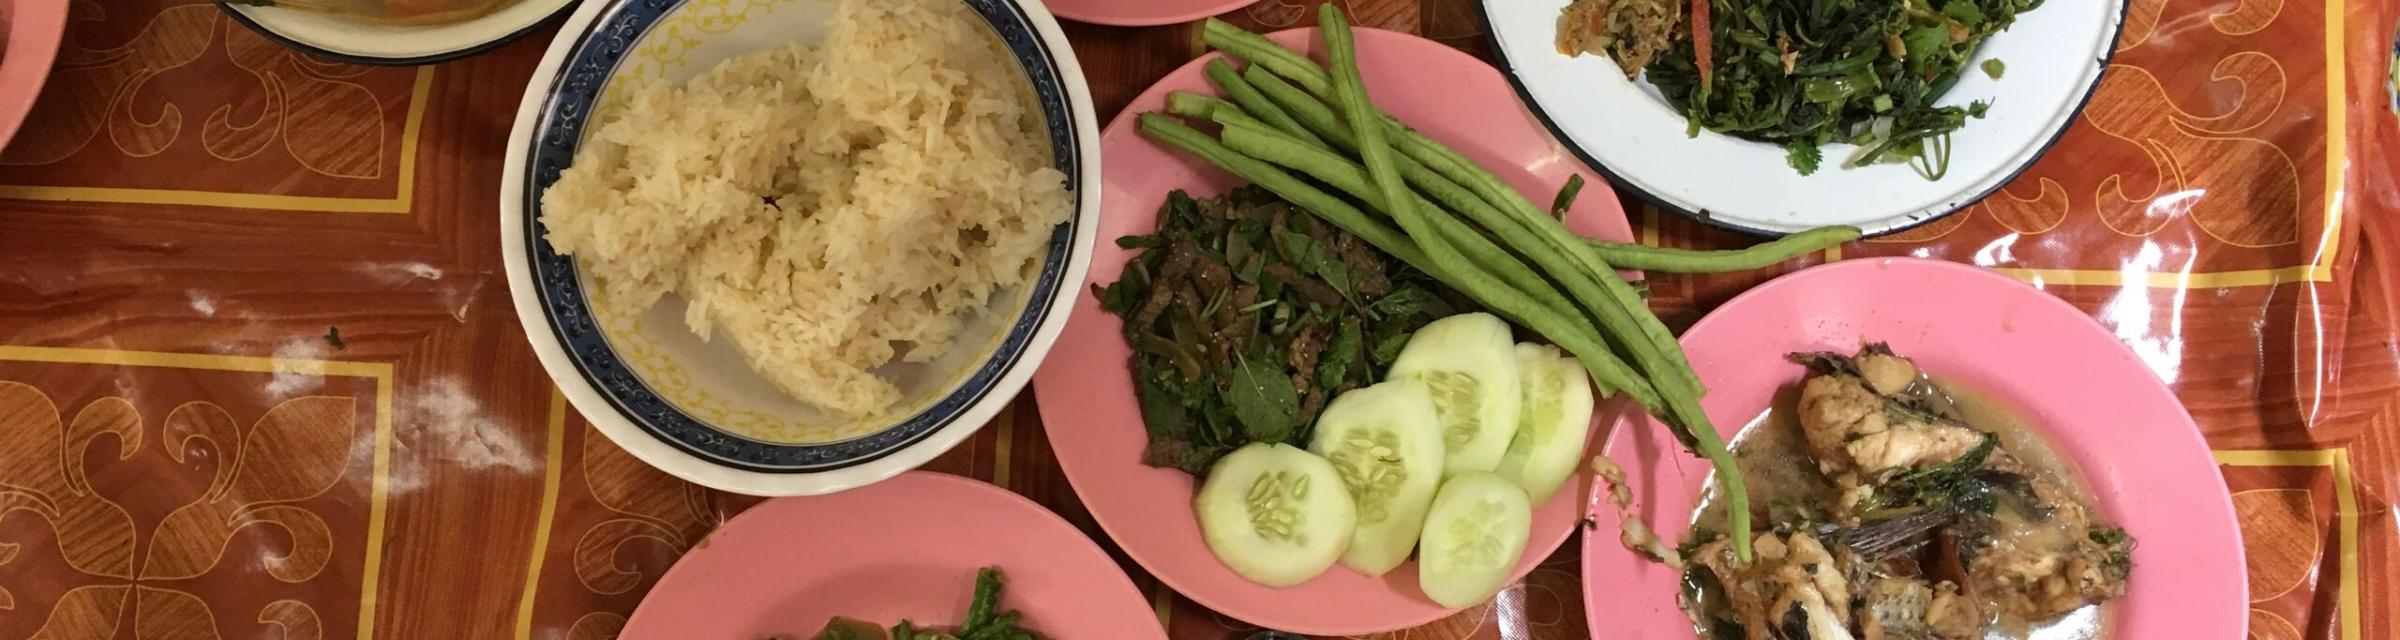 Life in South East Asia is full of color. Communal meals with various fish dishes are shared in plates like this with a group. Photo by Ellyn Schellenberg.